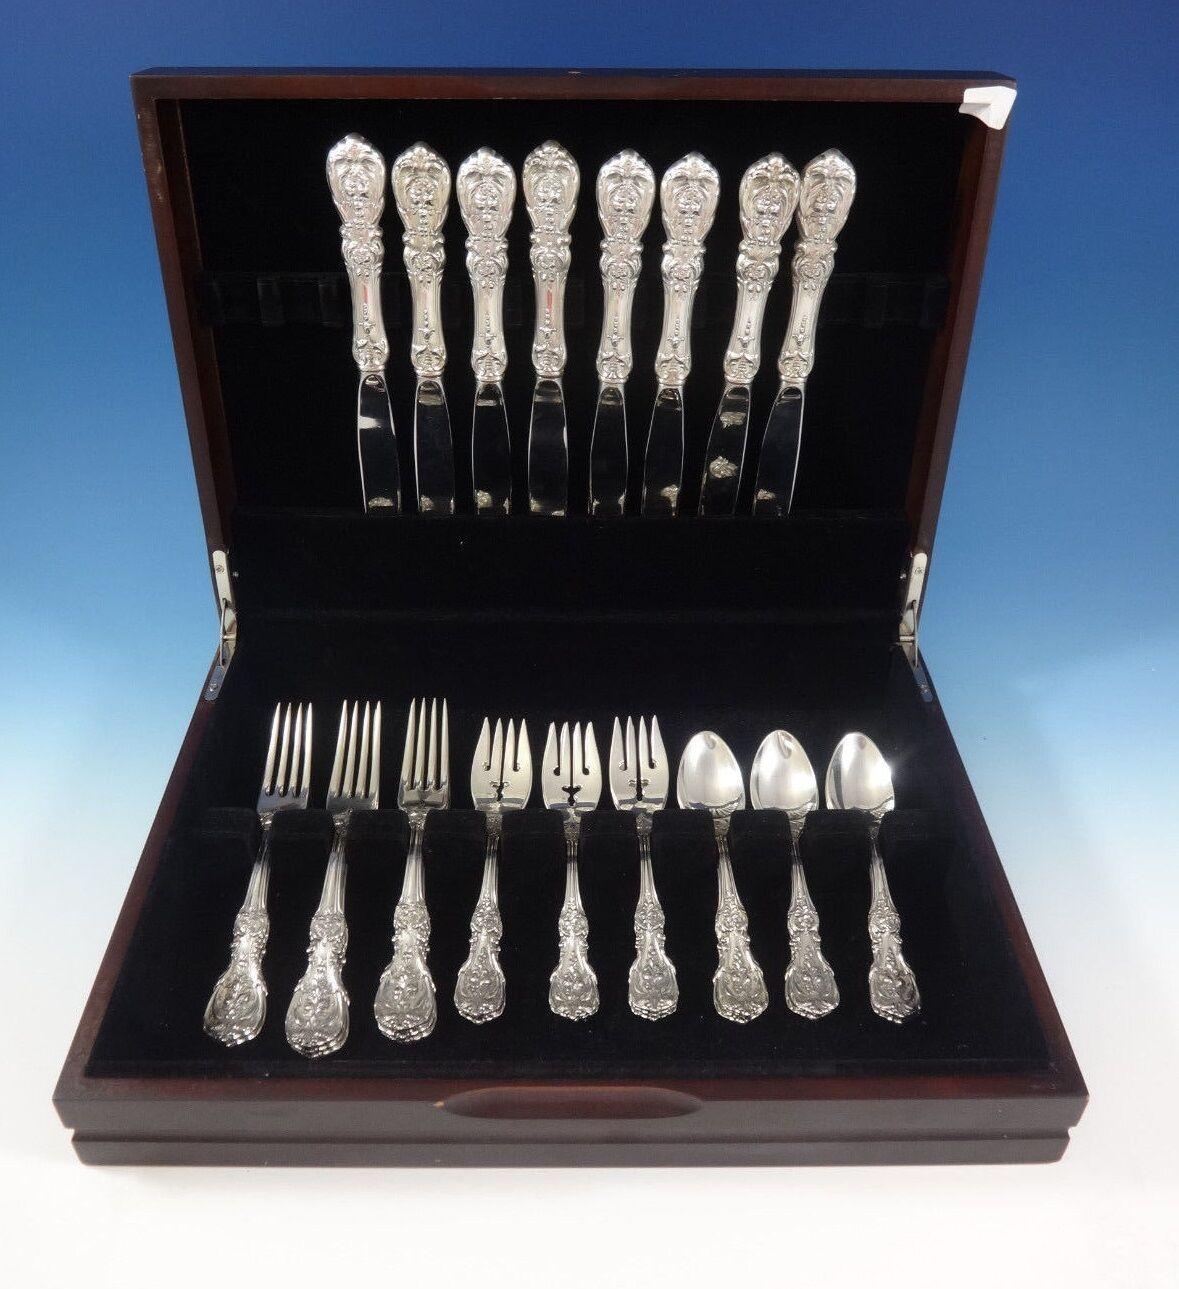 Often called America's most glorious sterling silver flatware pattern, Francis I is a true work of art. Each piece's central decoration represents a different cluster of fruit and flowers, giving your table a unique and classic presentation. This is